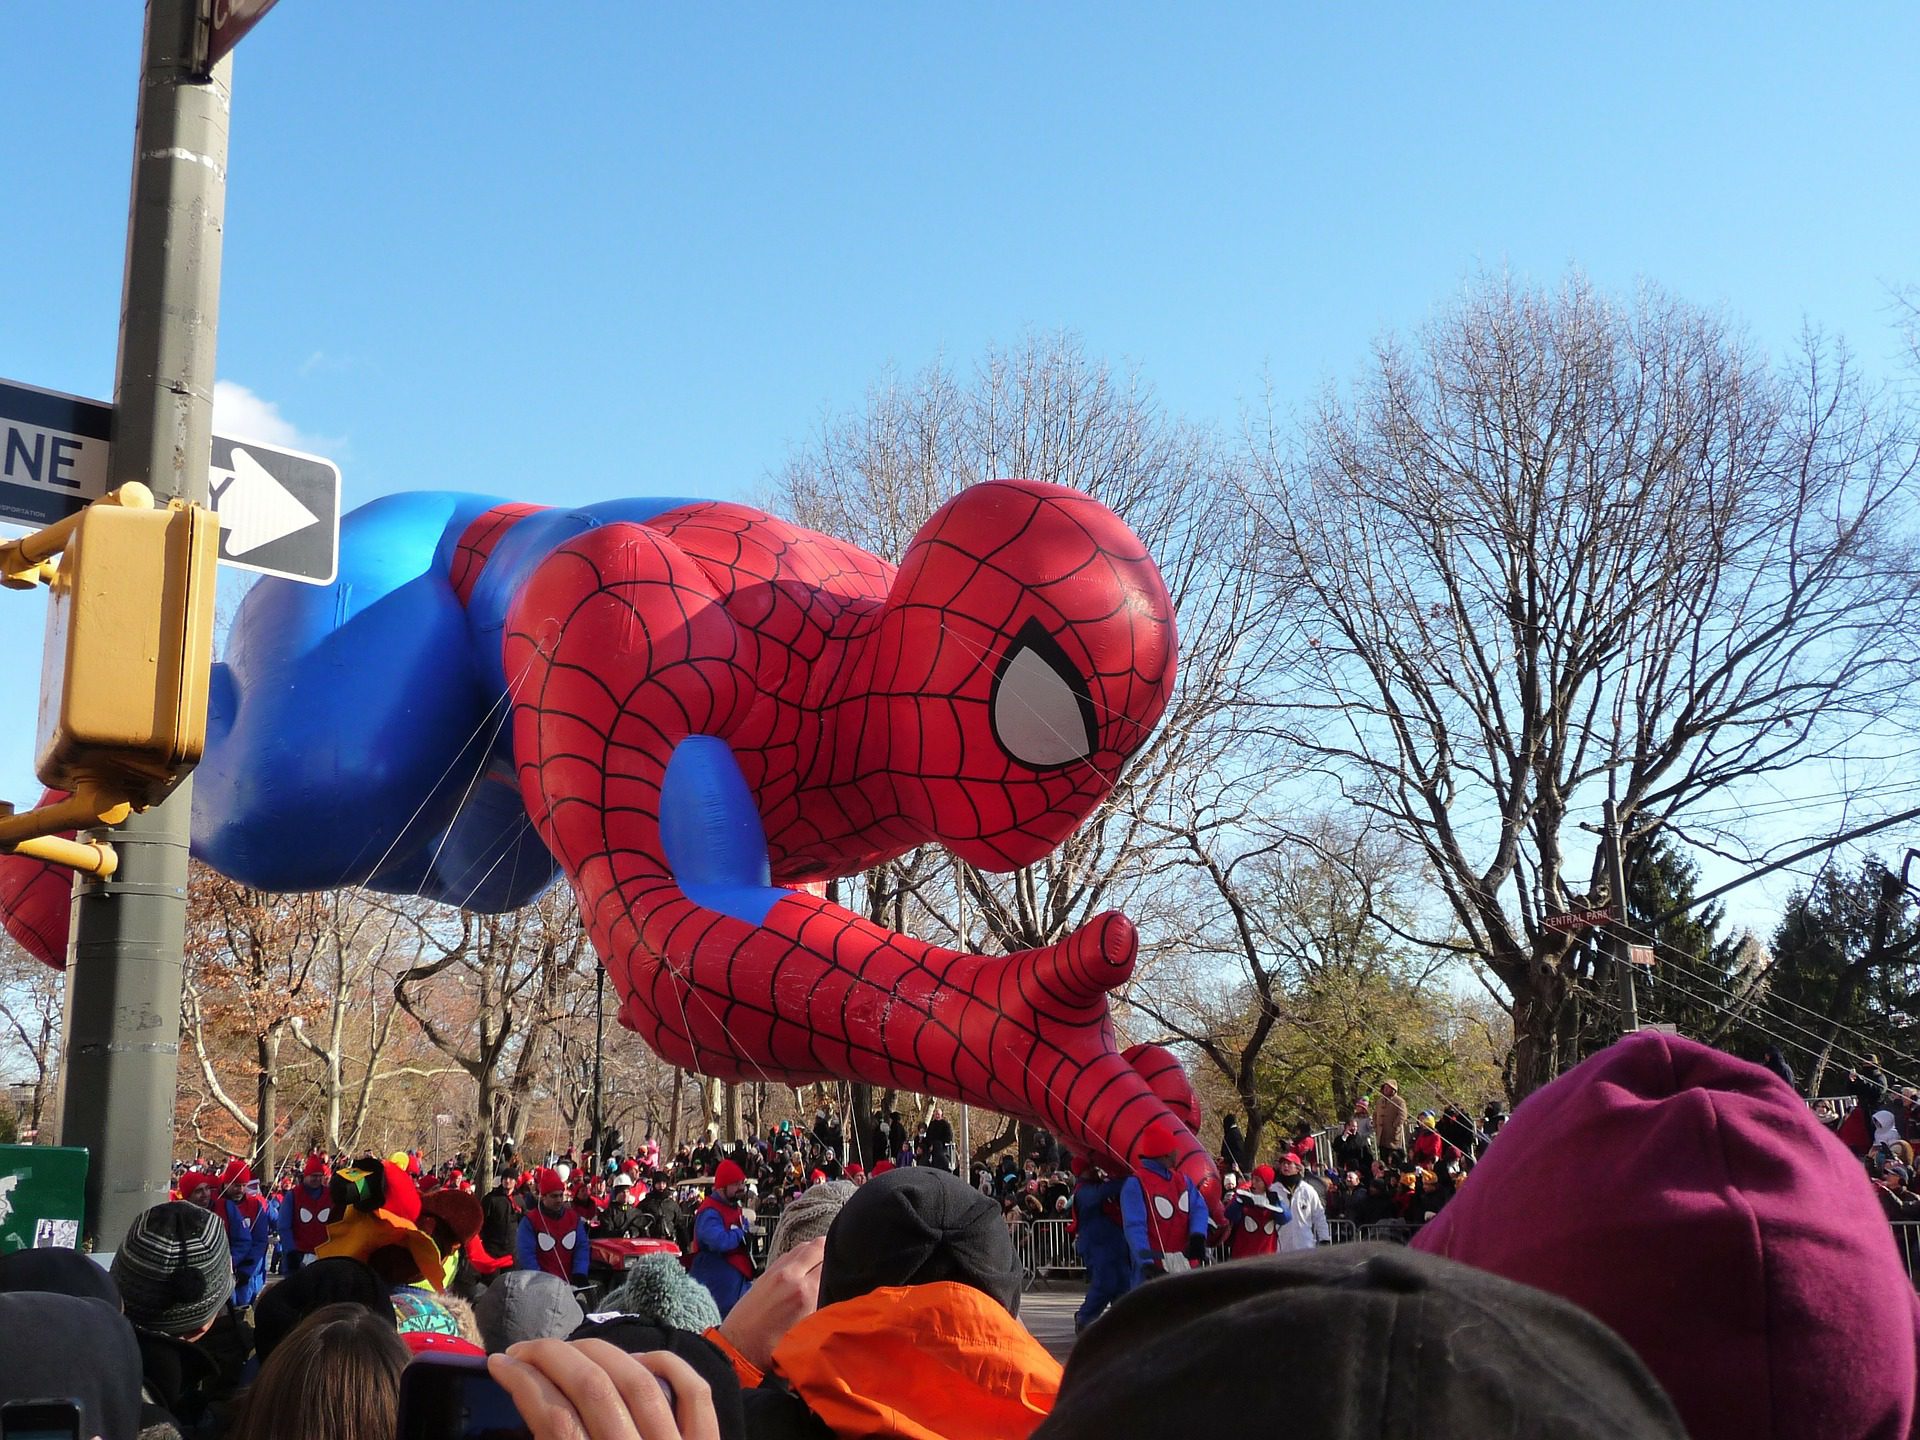 Giant Spider Man Balloon Float, Macy's Thanksgiving Day Parade, NYC